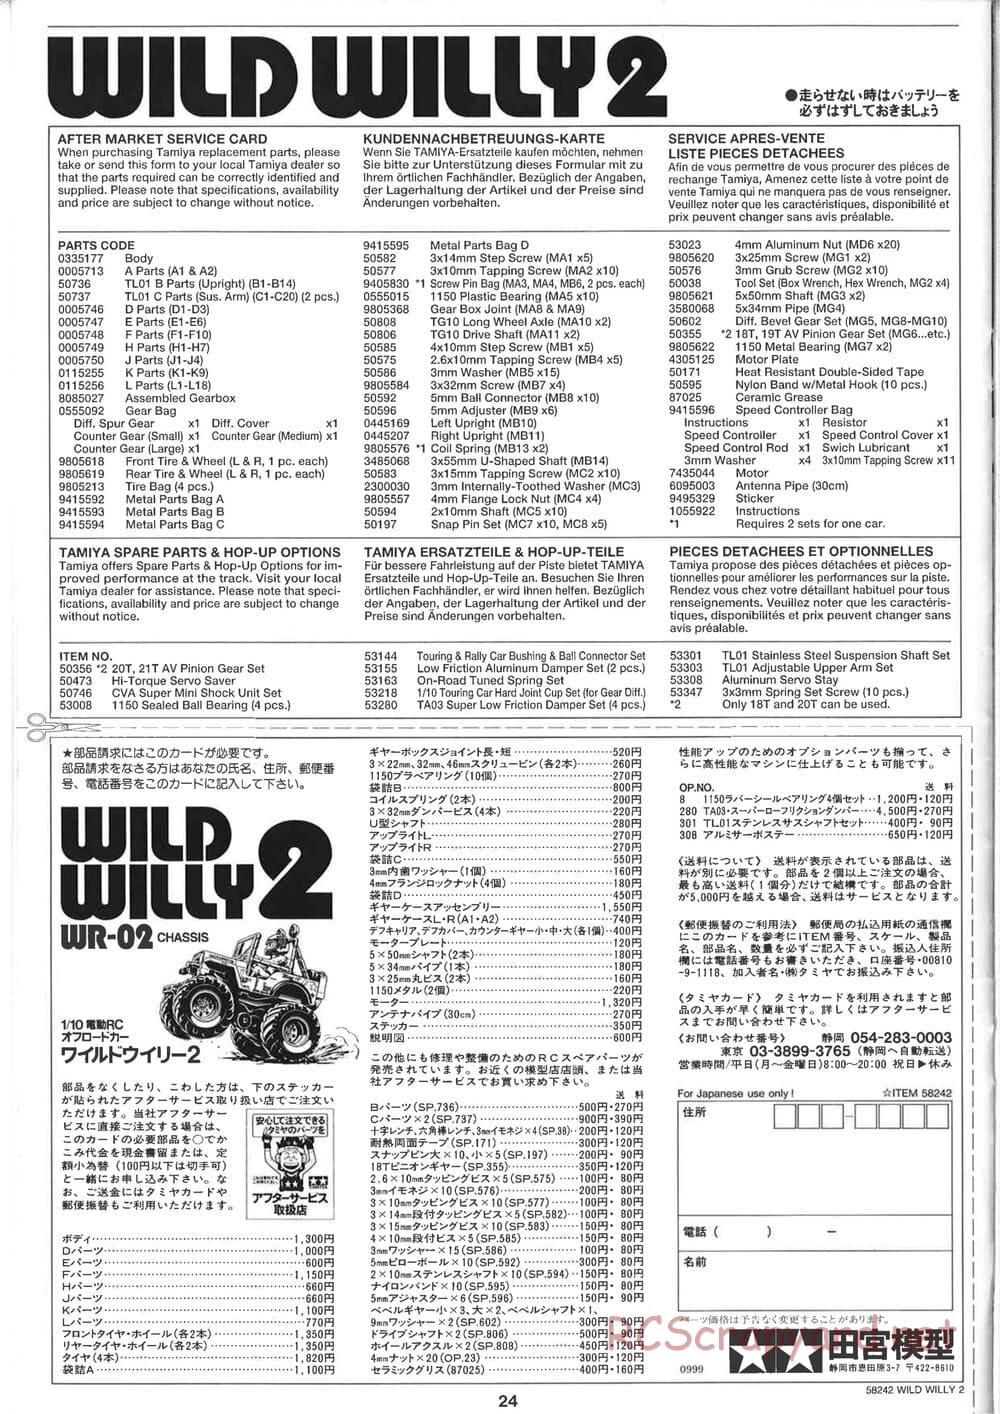 Tamiya - Wild Willy 2 - WR-02 Chassis - Manual - Page 24